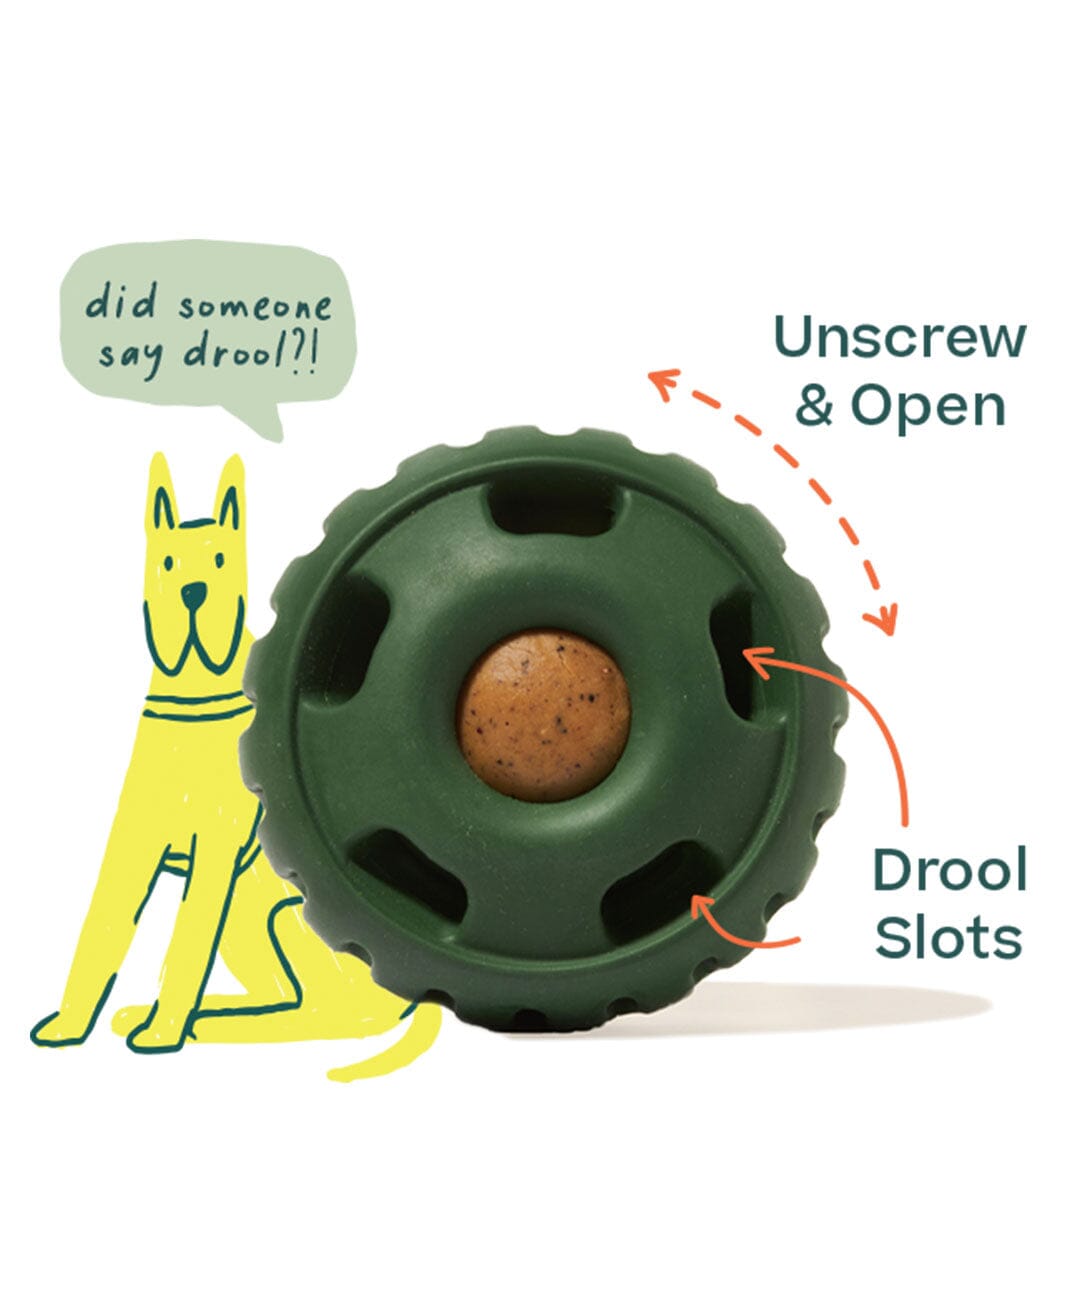 Pet Supplies : HOPET Dog Puzzle Toys for Large Dogs, Dog Treat